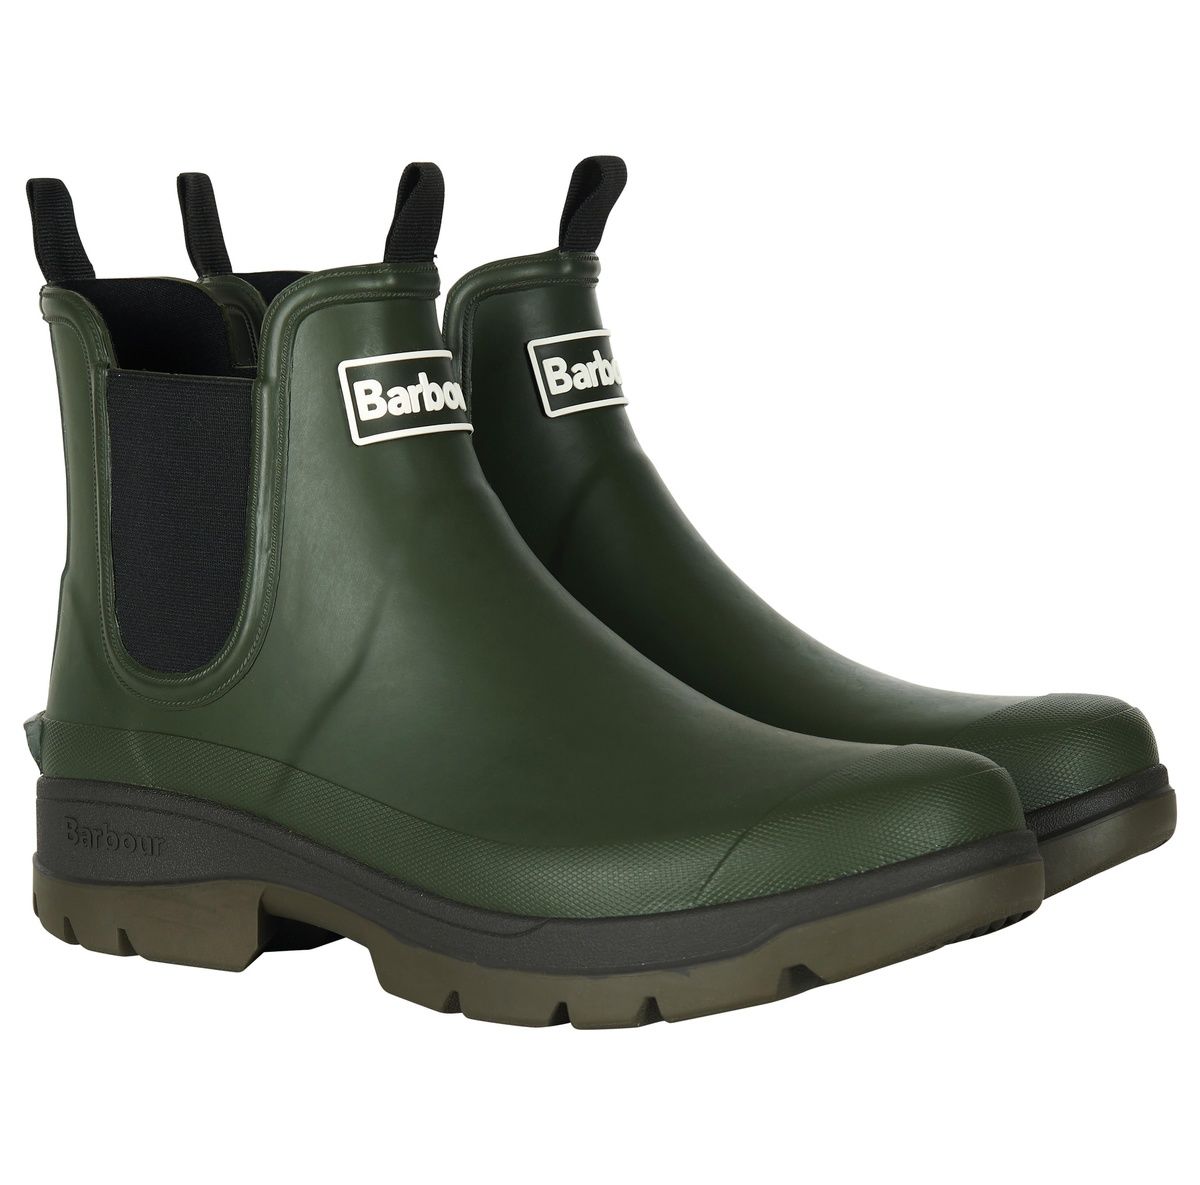 Barbour Nimbus Wellie Olive Green Mens Chelsea Boots MRF0028-OL51 in a Plain Man-made in Size 11